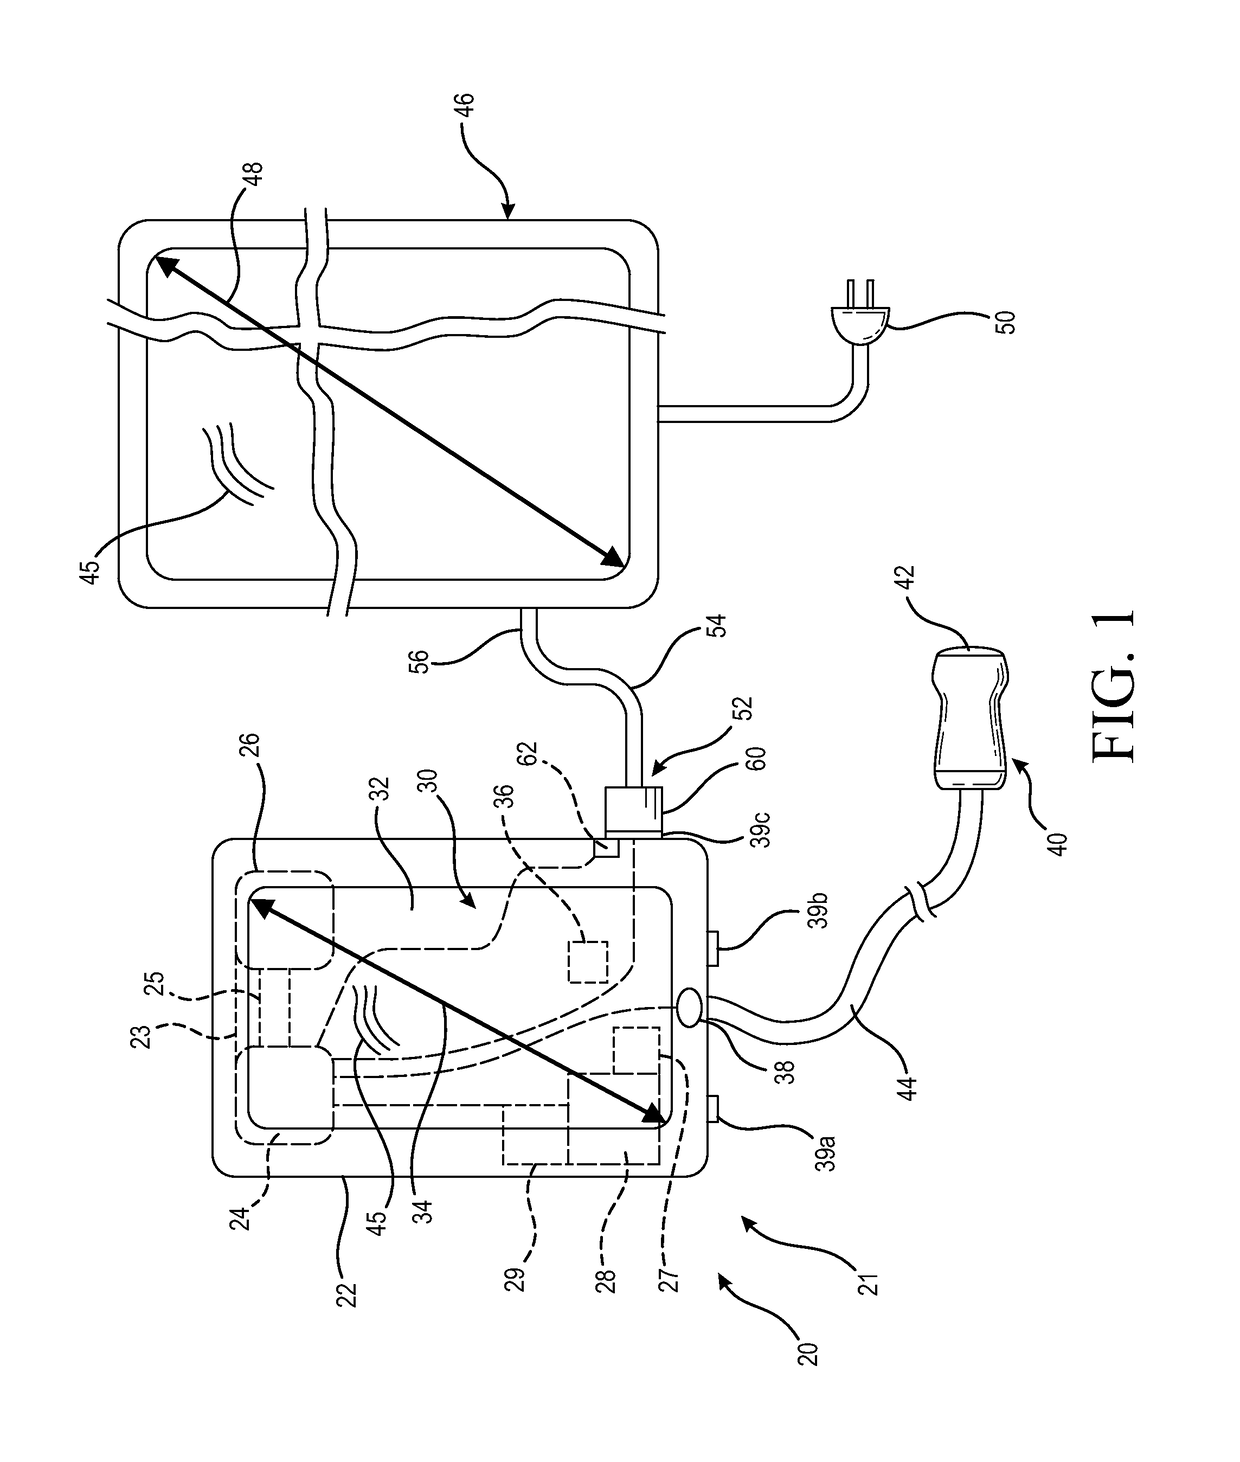 Dual display presentation apparatus for portable medical ultrasound scanning systems